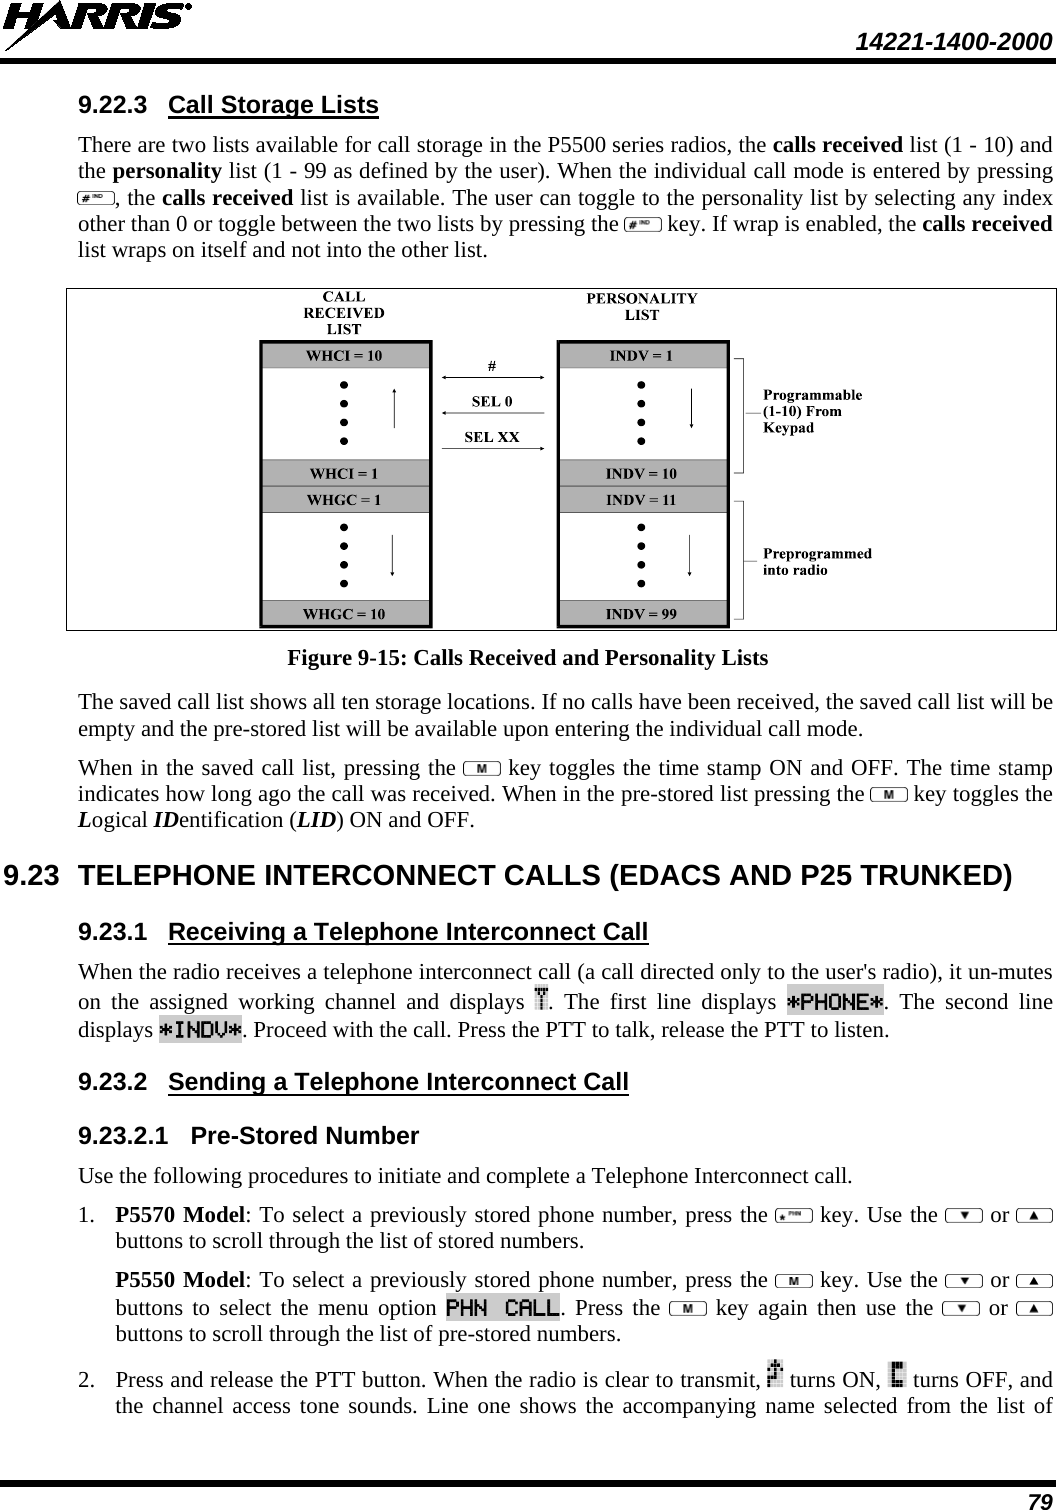  14221-1400-2000  79 9.22.3 There are two lists available for call storage in the P5500 series radios, the calls received list (1 - 10) and the personality list (1 - 99 as defined by the user). When the individual call mode is entered by pressing Call Storage Lists , the calls received list is available. The user can toggle to the personality list by selecting any index other than 0 or toggle between the two lists by pressing the   key. If wrap is enabled, the calls received list wraps on itself and not into the other list.  Figure 9-15: Calls Received and Personality Lists The saved call list shows all ten storage locations. If no calls have been received, the saved call list will be empty and the pre-stored list will be available upon entering the individual call mode.  When in the saved call list, pressing the   key toggles the time stamp ON and OFF. The time stamp indicates how long ago the call was received. When in the pre-stored list pressing the   key toggles the Logical IDentification (LID) ON and OFF. 9.23 TELEPHONE INTERCONNECT CALLS (EDACS AND P25 TRUNKED) 9.23.1 When the radio receives a telephone interconnect call (a call directed only to the user&apos;s radio), it un-mutes on the assigned working channel and displays Receiving a Telephone Interconnect Call . The first line displays  *PHONE*. The second line displays *INDV*. Proceed with the call. Press the PTT to talk, release the PTT to listen. 9.23.2 9.23.2.1 Pre-Stored Number Sending a Telephone Interconnect Call Use the following procedures to initiate and complete a Telephone Interconnect call.  1. P5570 Model: To select a previously stored phone number, press the   key. Use the   or  buttons to scroll through the list of stored numbers.  P5550 Model: To select a previously stored phone number, press the   key. Use the   or  buttons to select the menu option PHN CALL. Press the   key again then use the   or  buttons to scroll through the list of pre-stored numbers.  2. Press and release the PTT button. When the radio is clear to transmit,   turns ON,   turns OFF, and the channel access tone sounds. Line one shows the accompanying name selected from the list of 